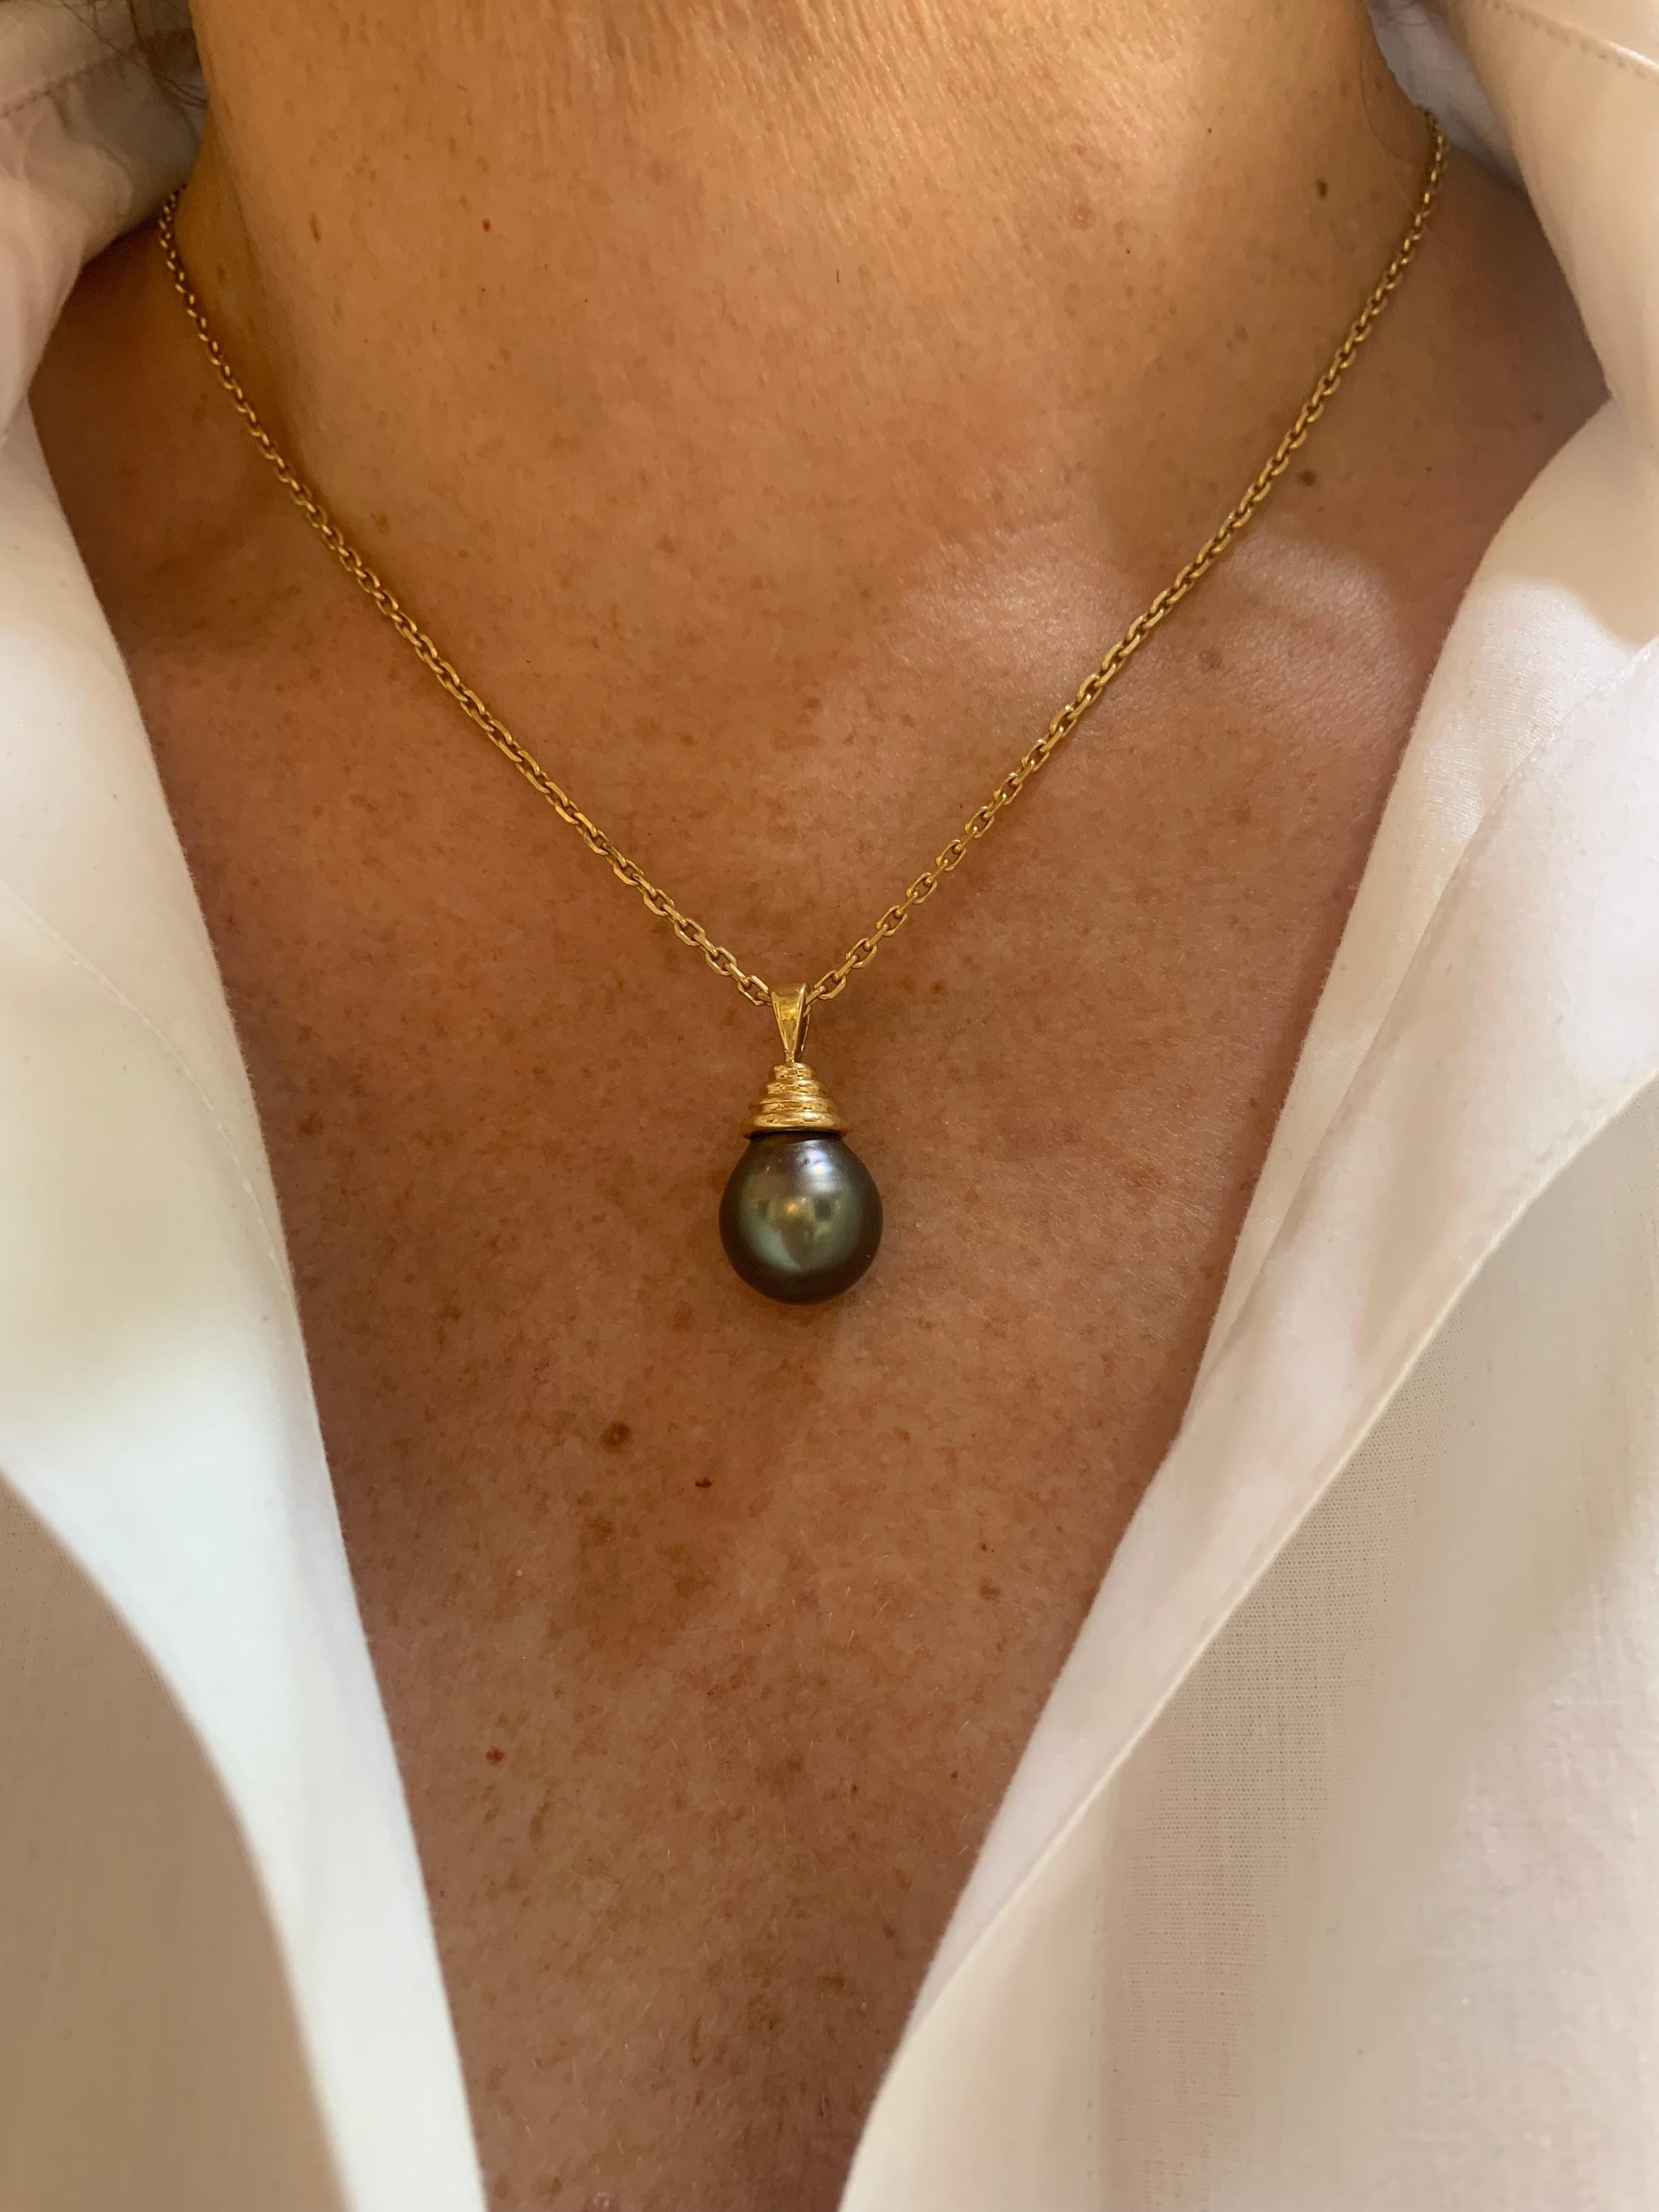 Pendant in gadrooned yellow gold set with a Tahitian pearl.

Pearl diameter: 13 mm (0.512 inch)

Pendant length: 25.90 mm (1.019 inch)

Total weight of the pendant: 5.5g

18 carat yellow gold, 750/1000th (Owl hallmark)

Although we take care of the